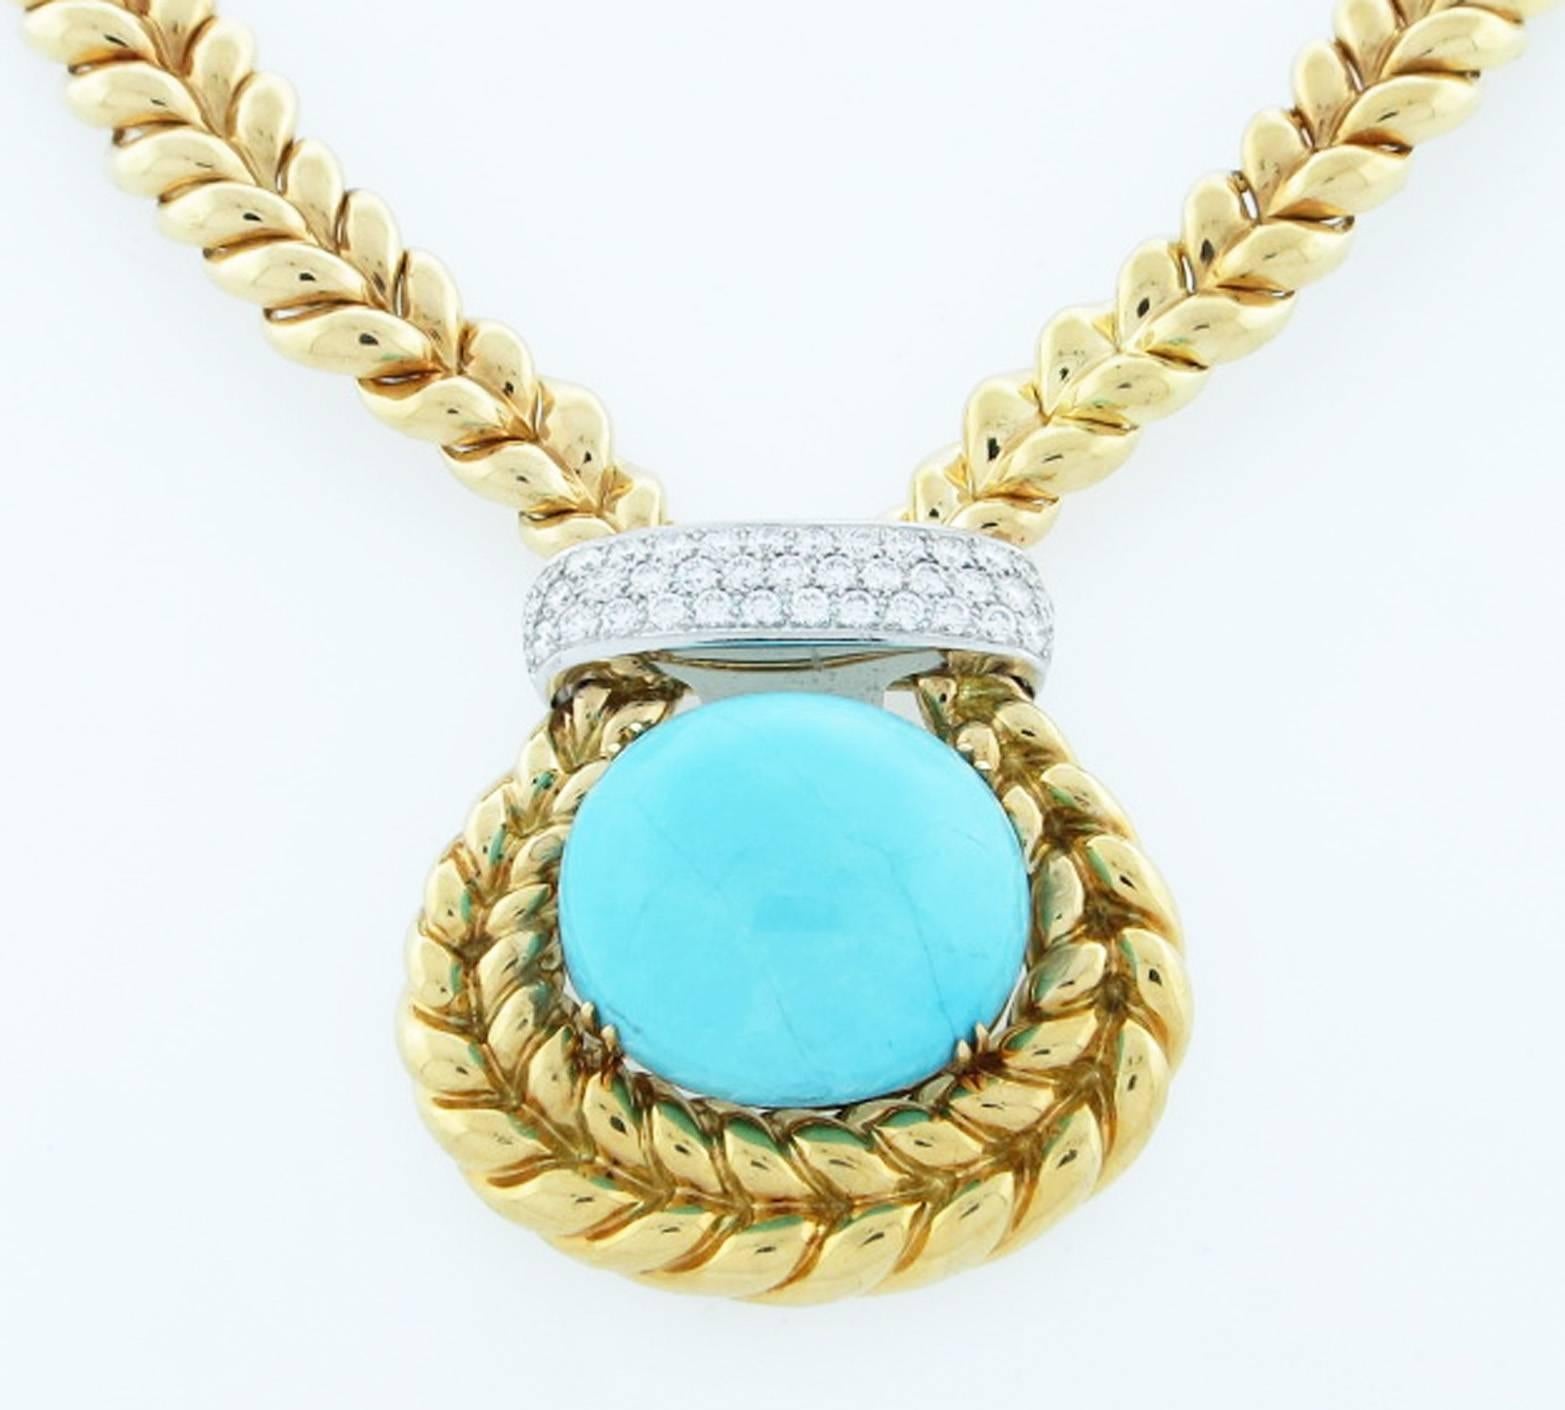 Beautifully constructed turquoise and diamond necklace made by the innovative jeweler Valentin Magro. The 18kt yellow gold illusion design link is set in the center with a large robin egg blue turquoise cabochon measuring approx 1 1/2 inches in